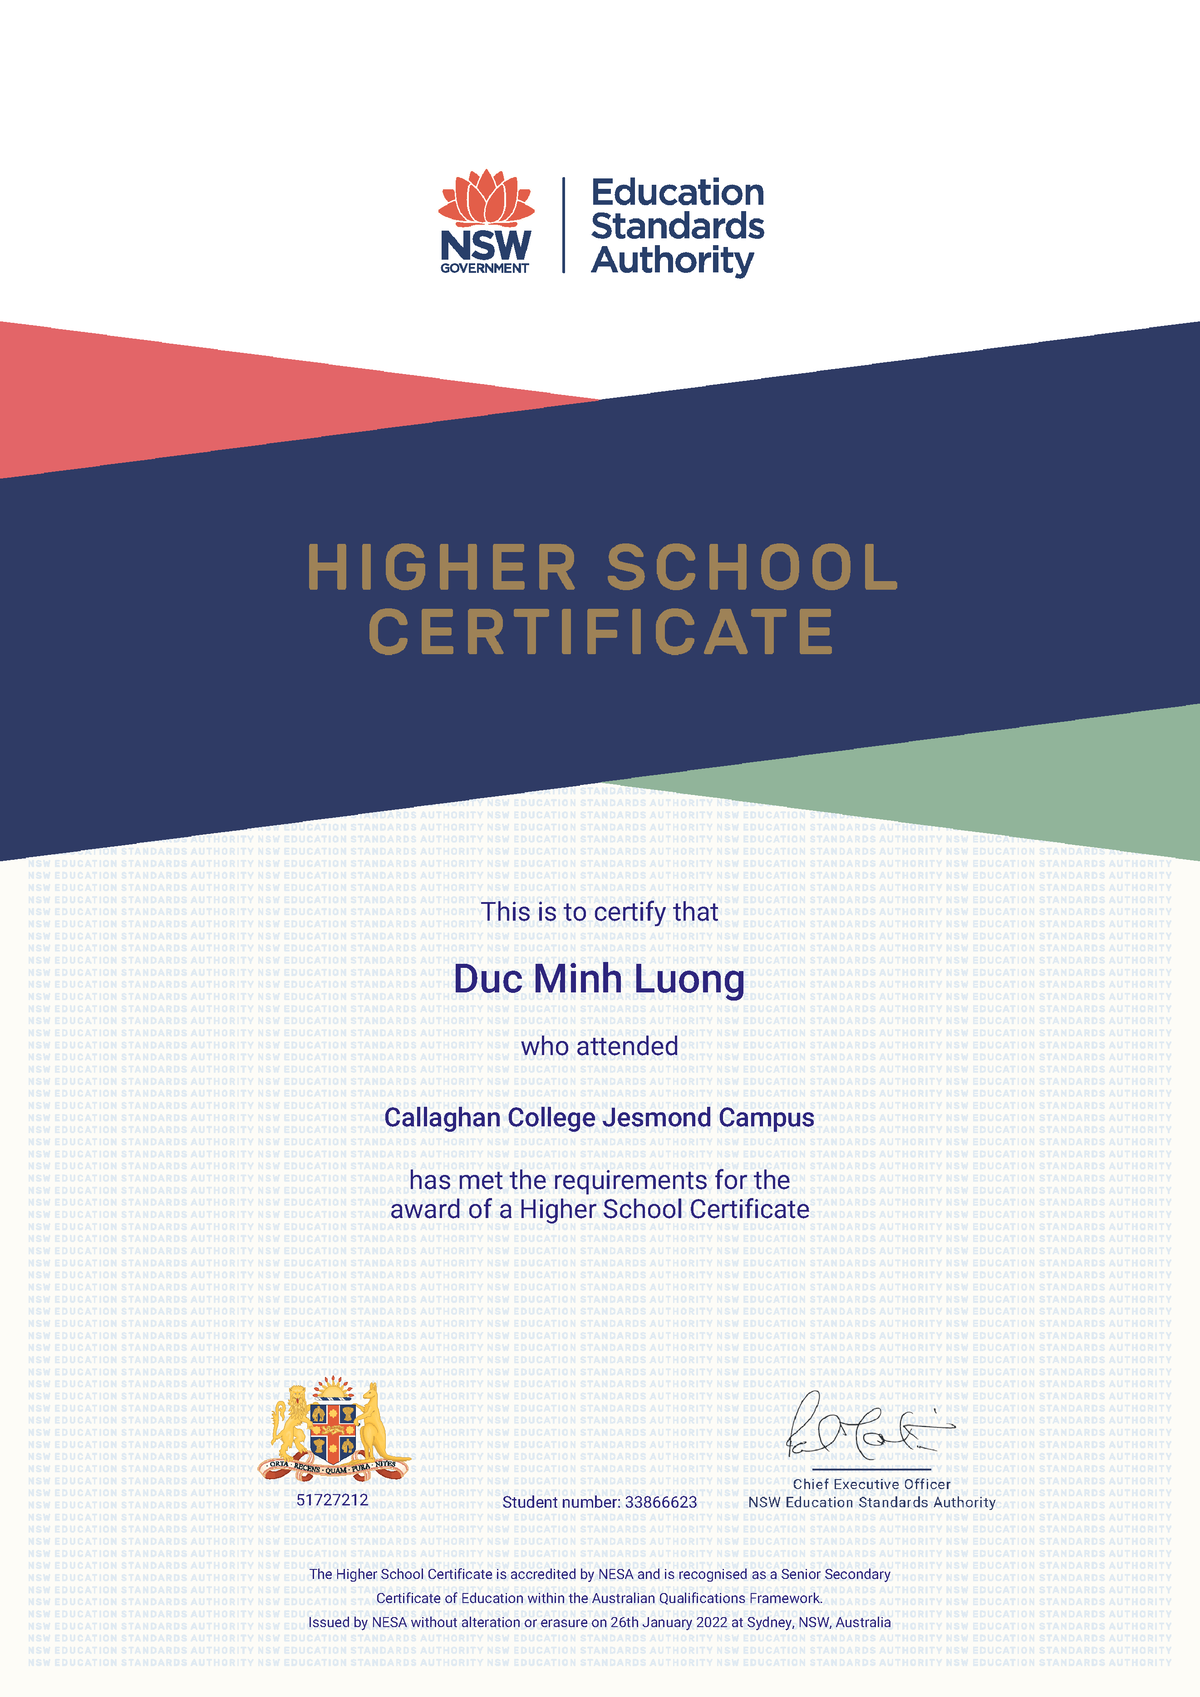 Studentsonline P3301182 The Higher School Certificate is accredited